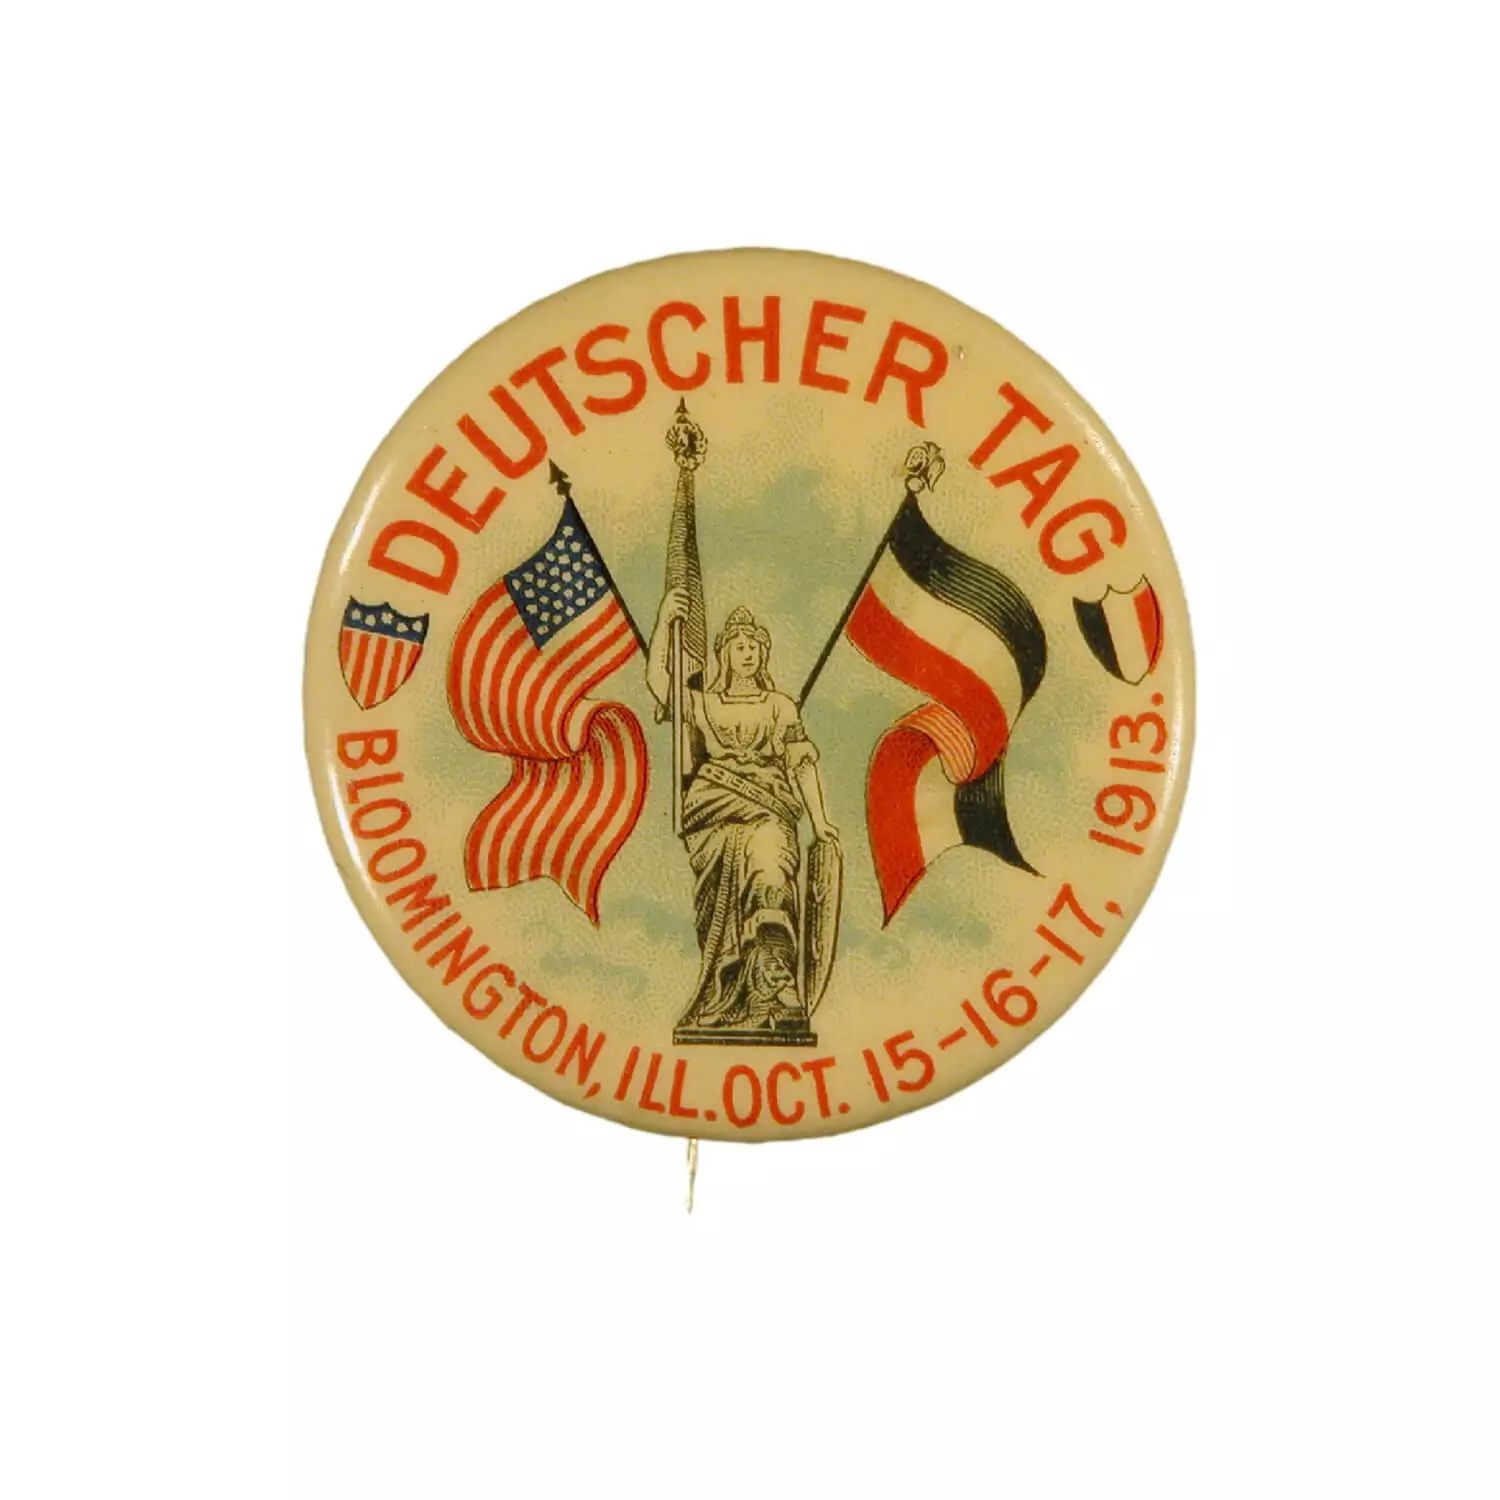 Pin with american and german flag. Text says DEUTSCHER TAG and Bloomington IL Oct 15-16-17, 1913.